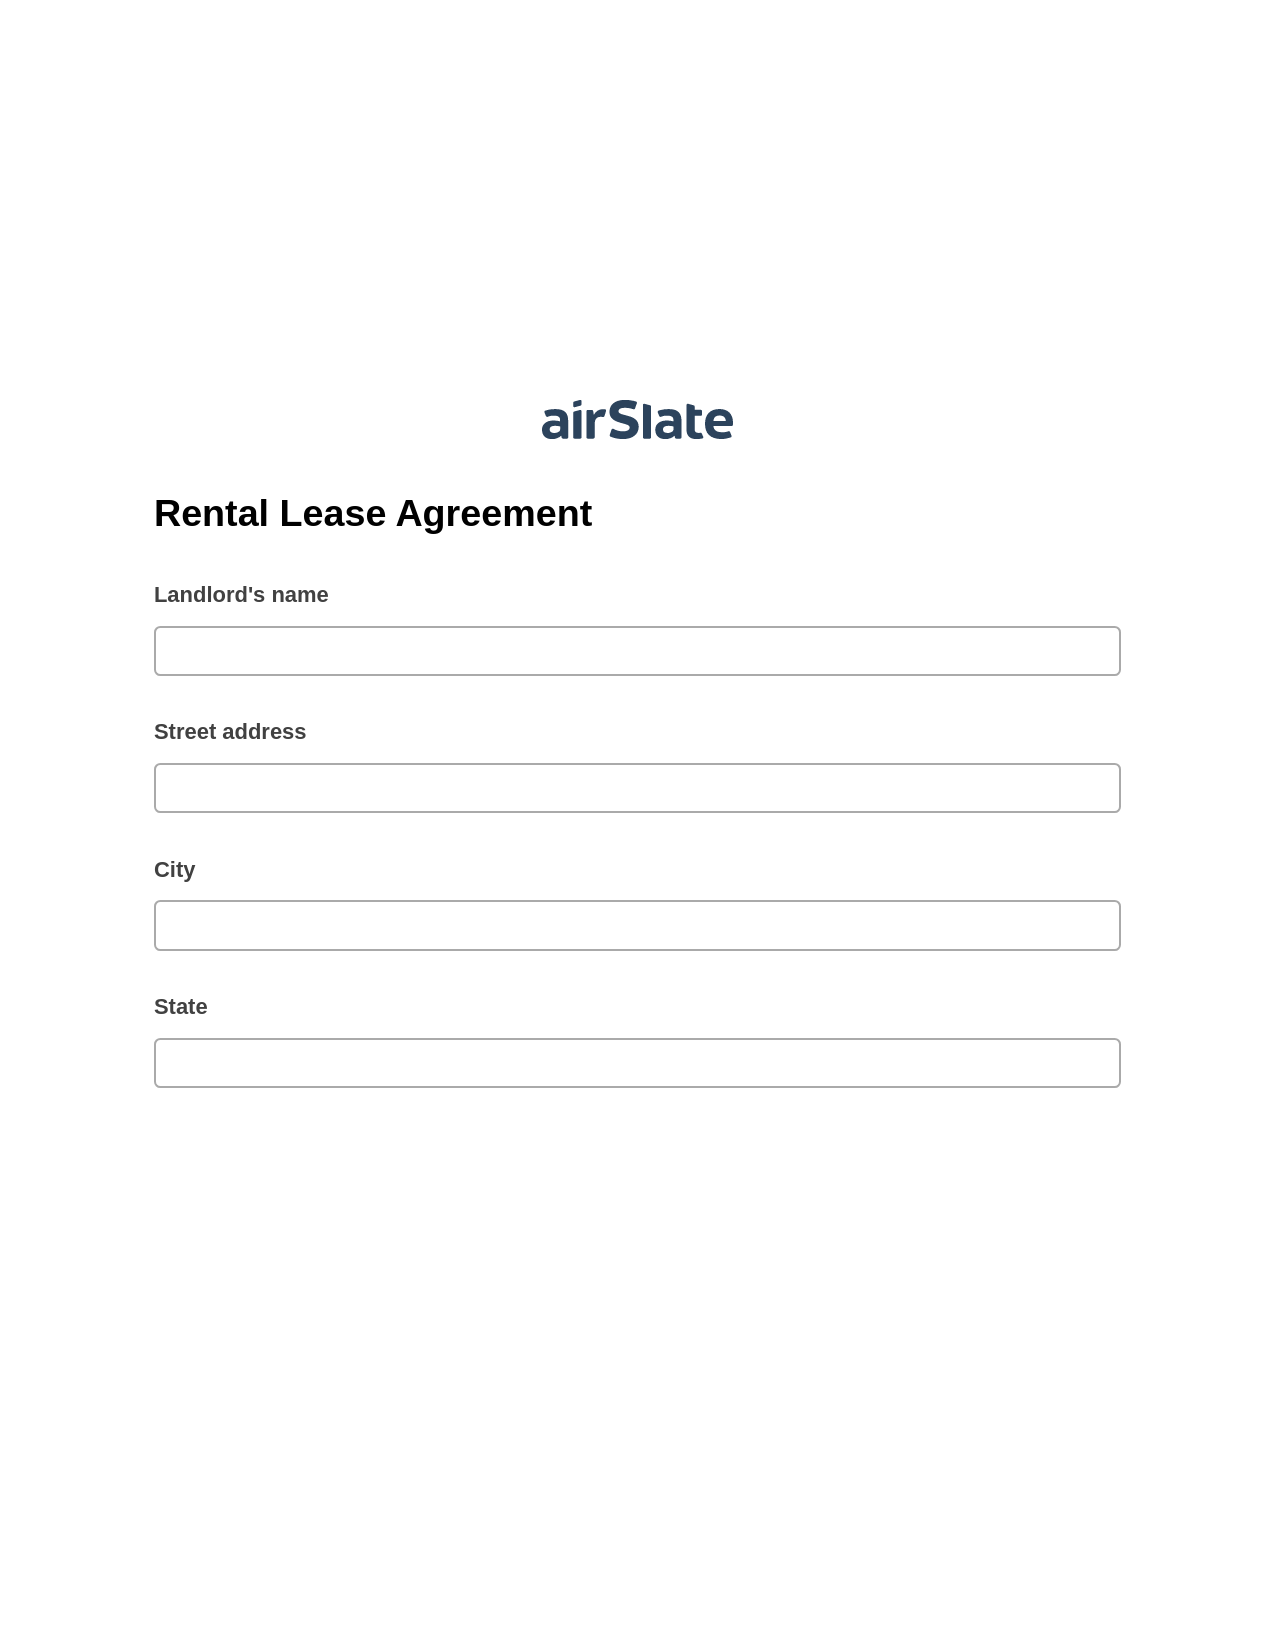 Rental Lease Agreement Pre-fill from CSV File Bot, Remove Tags From Slate Bot, Export to Formstack Documents Bot